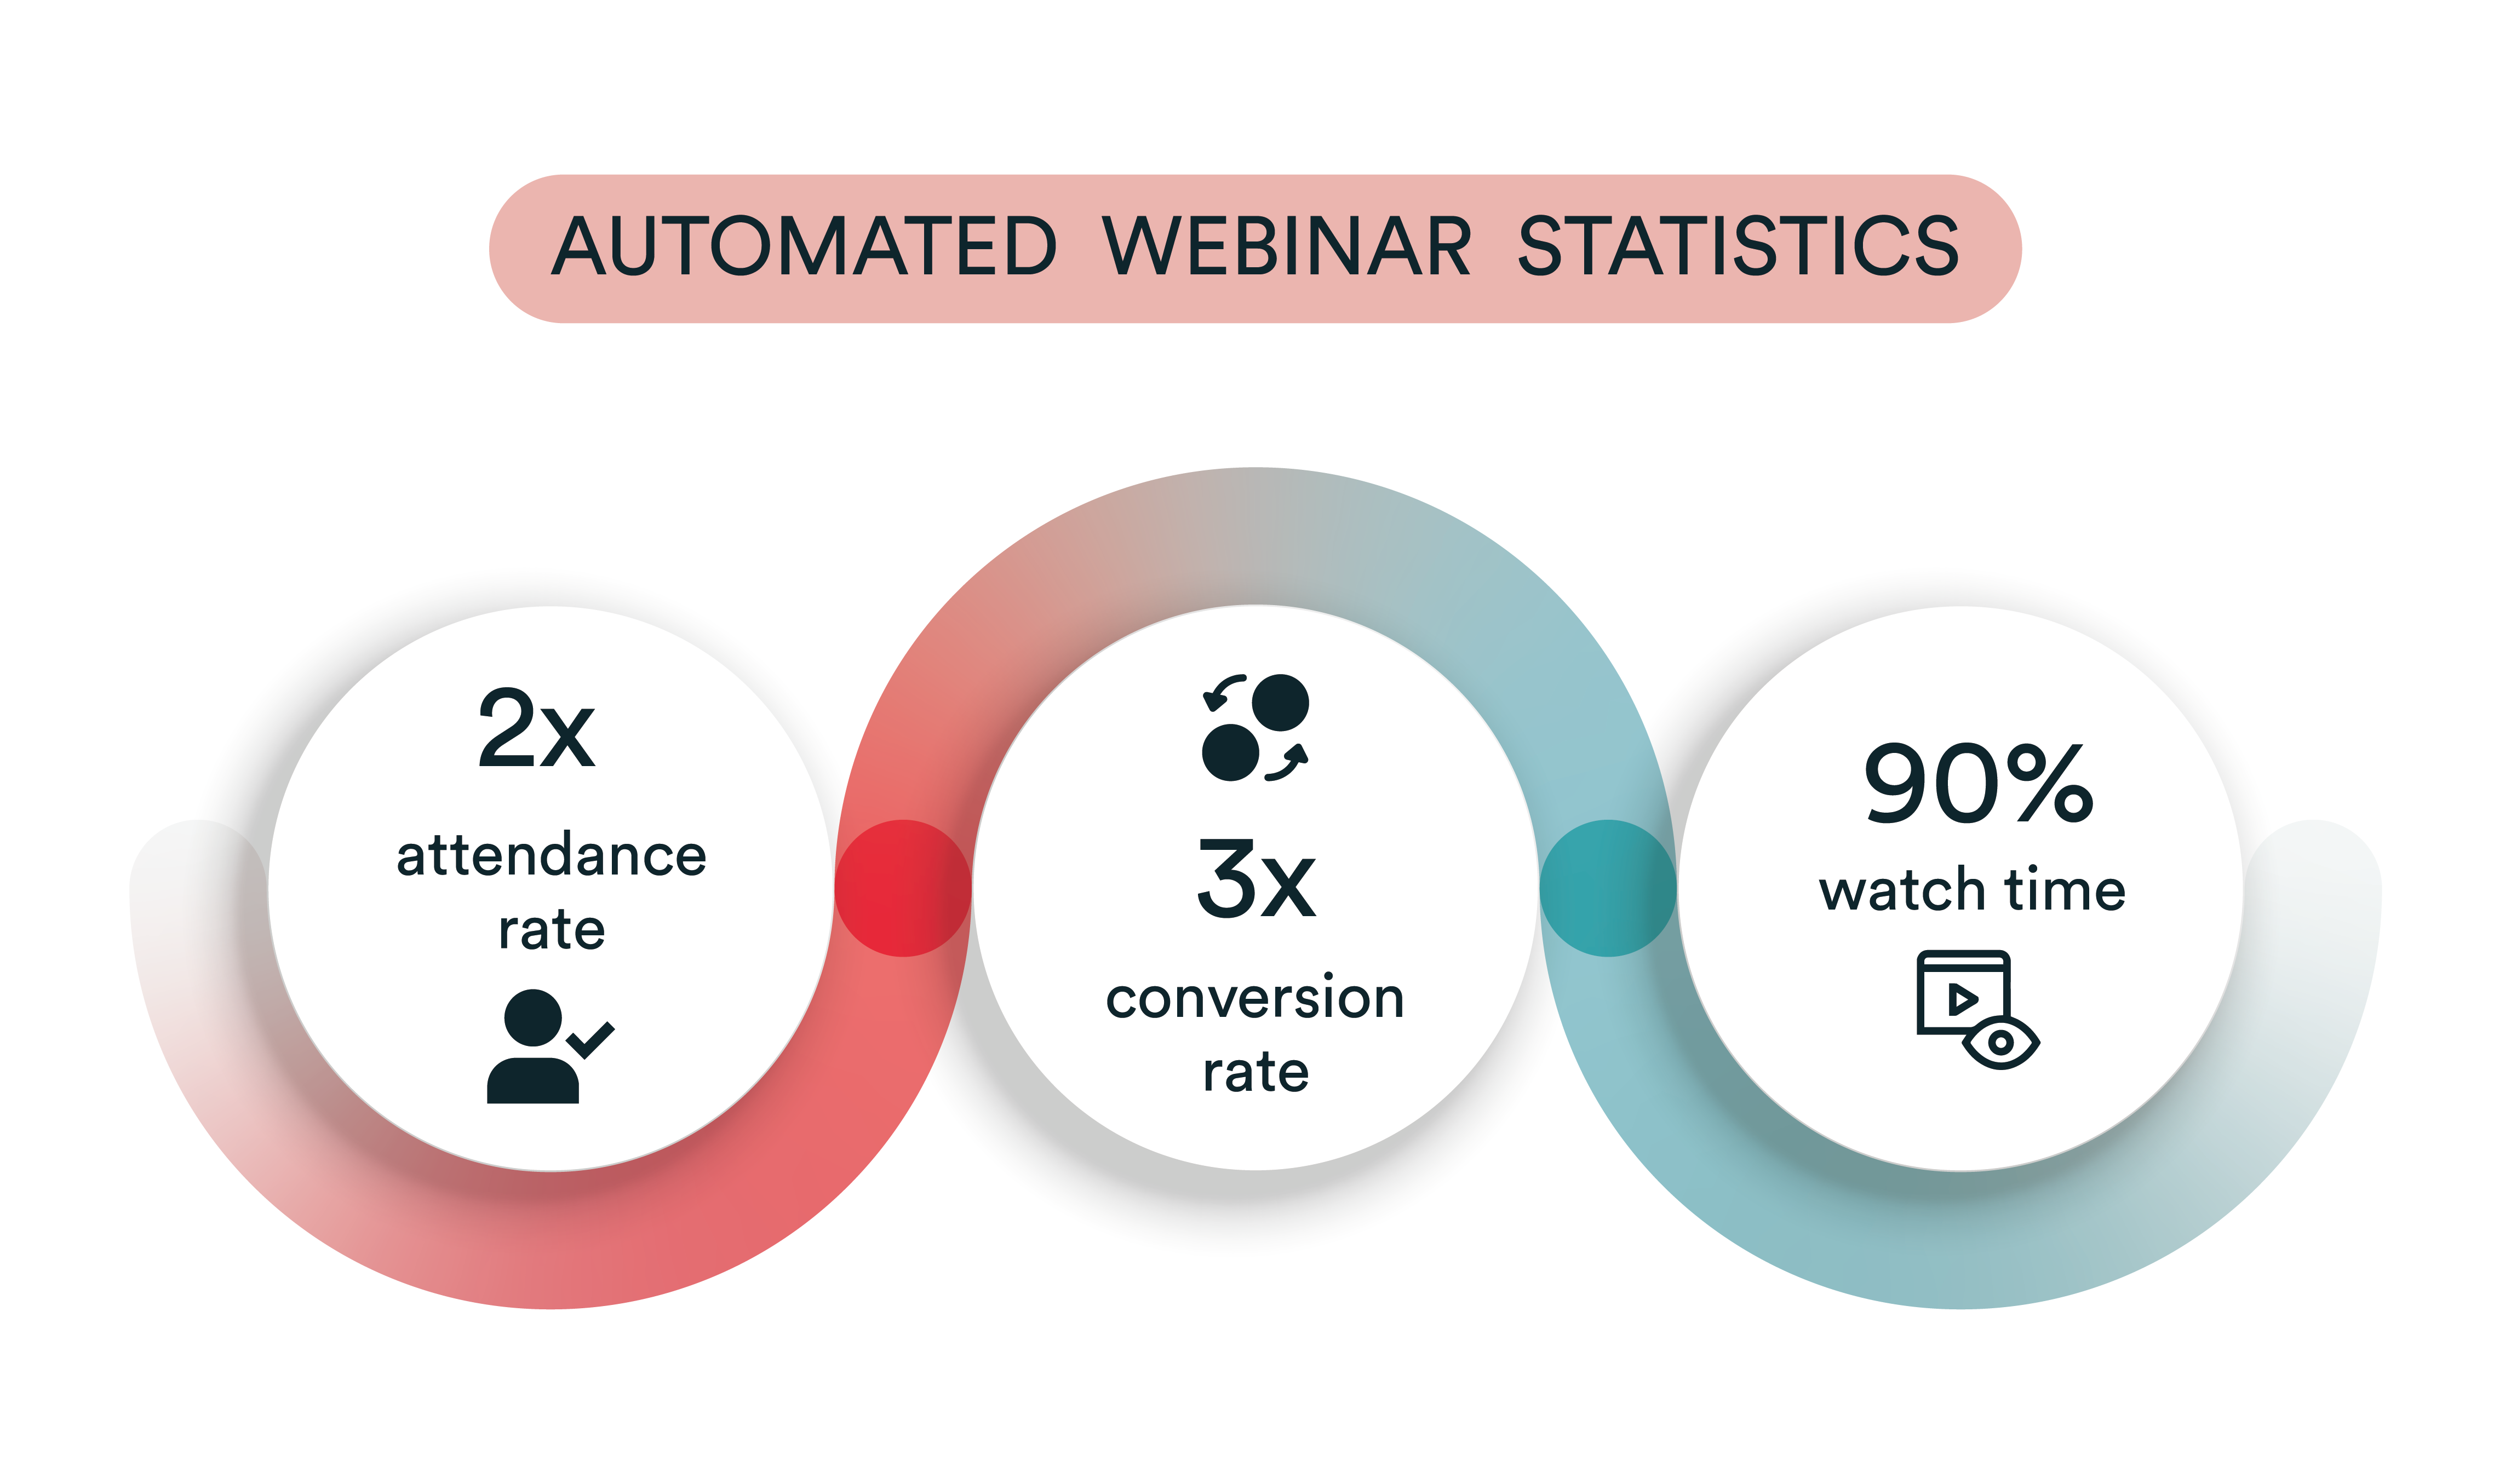 Automated webinar statistics illustration showing double attendance rate, triple conversion rate, and 90% watch time.